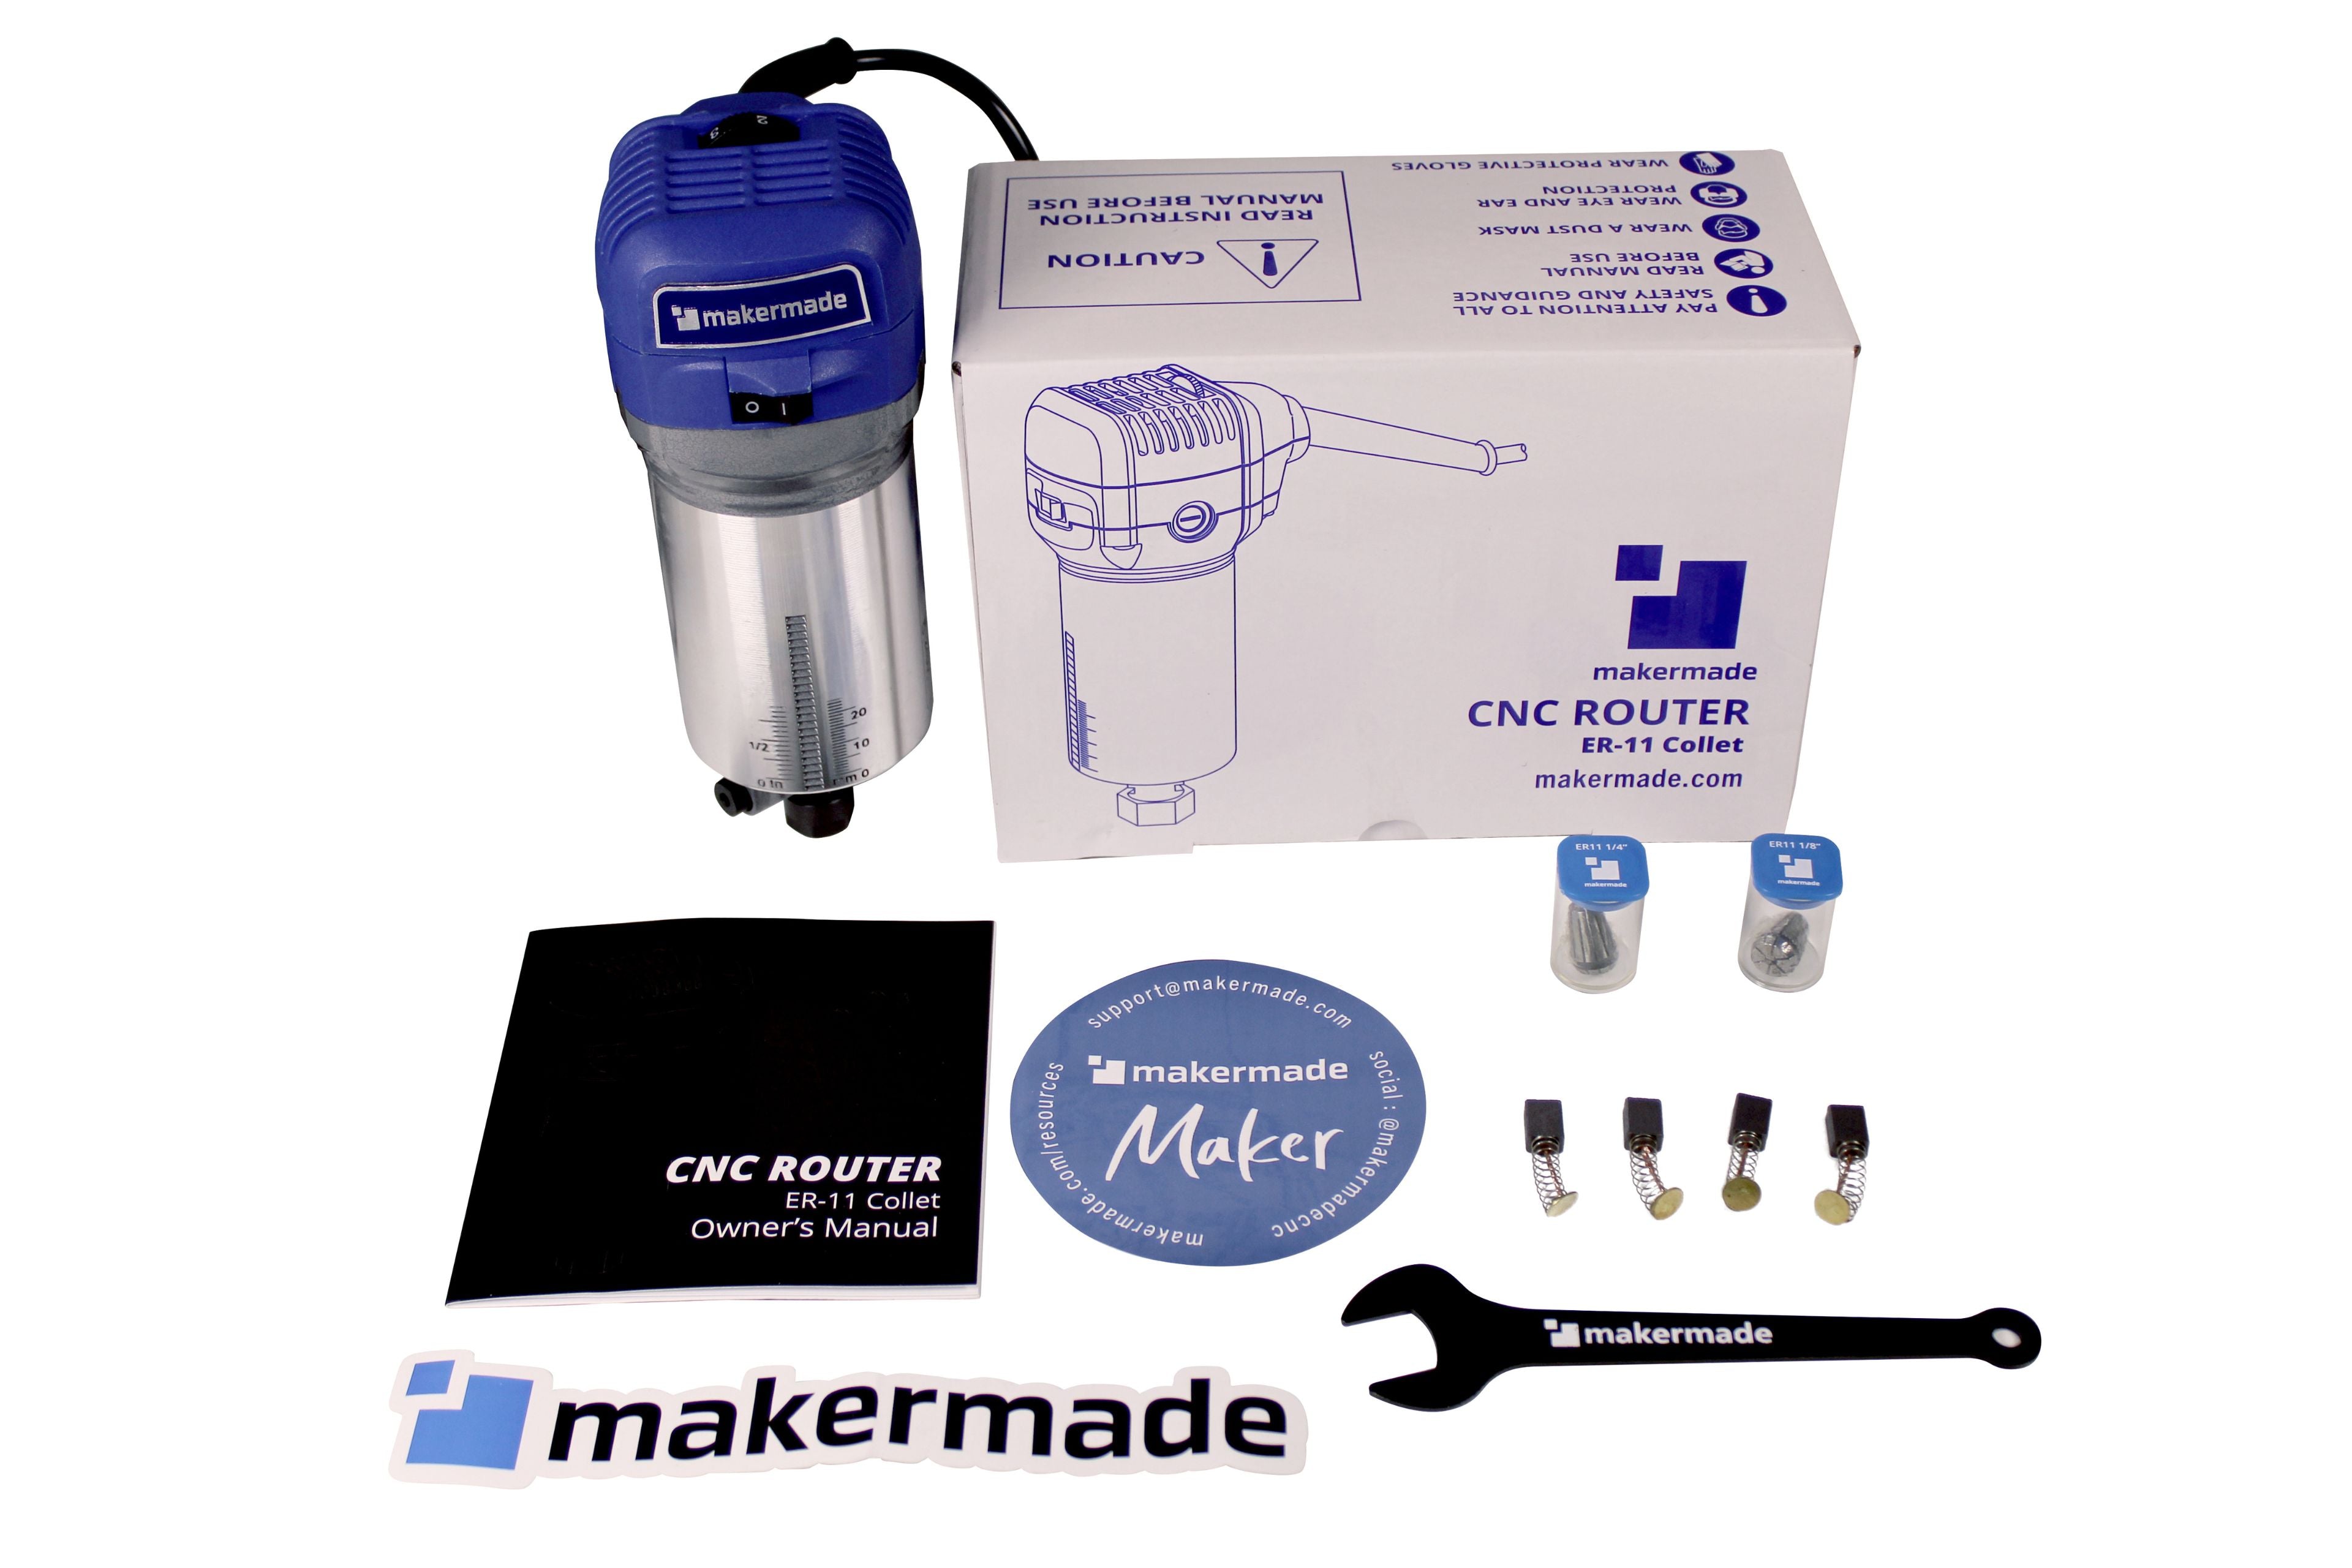 MakerMade CNC Router with ER-11 collet